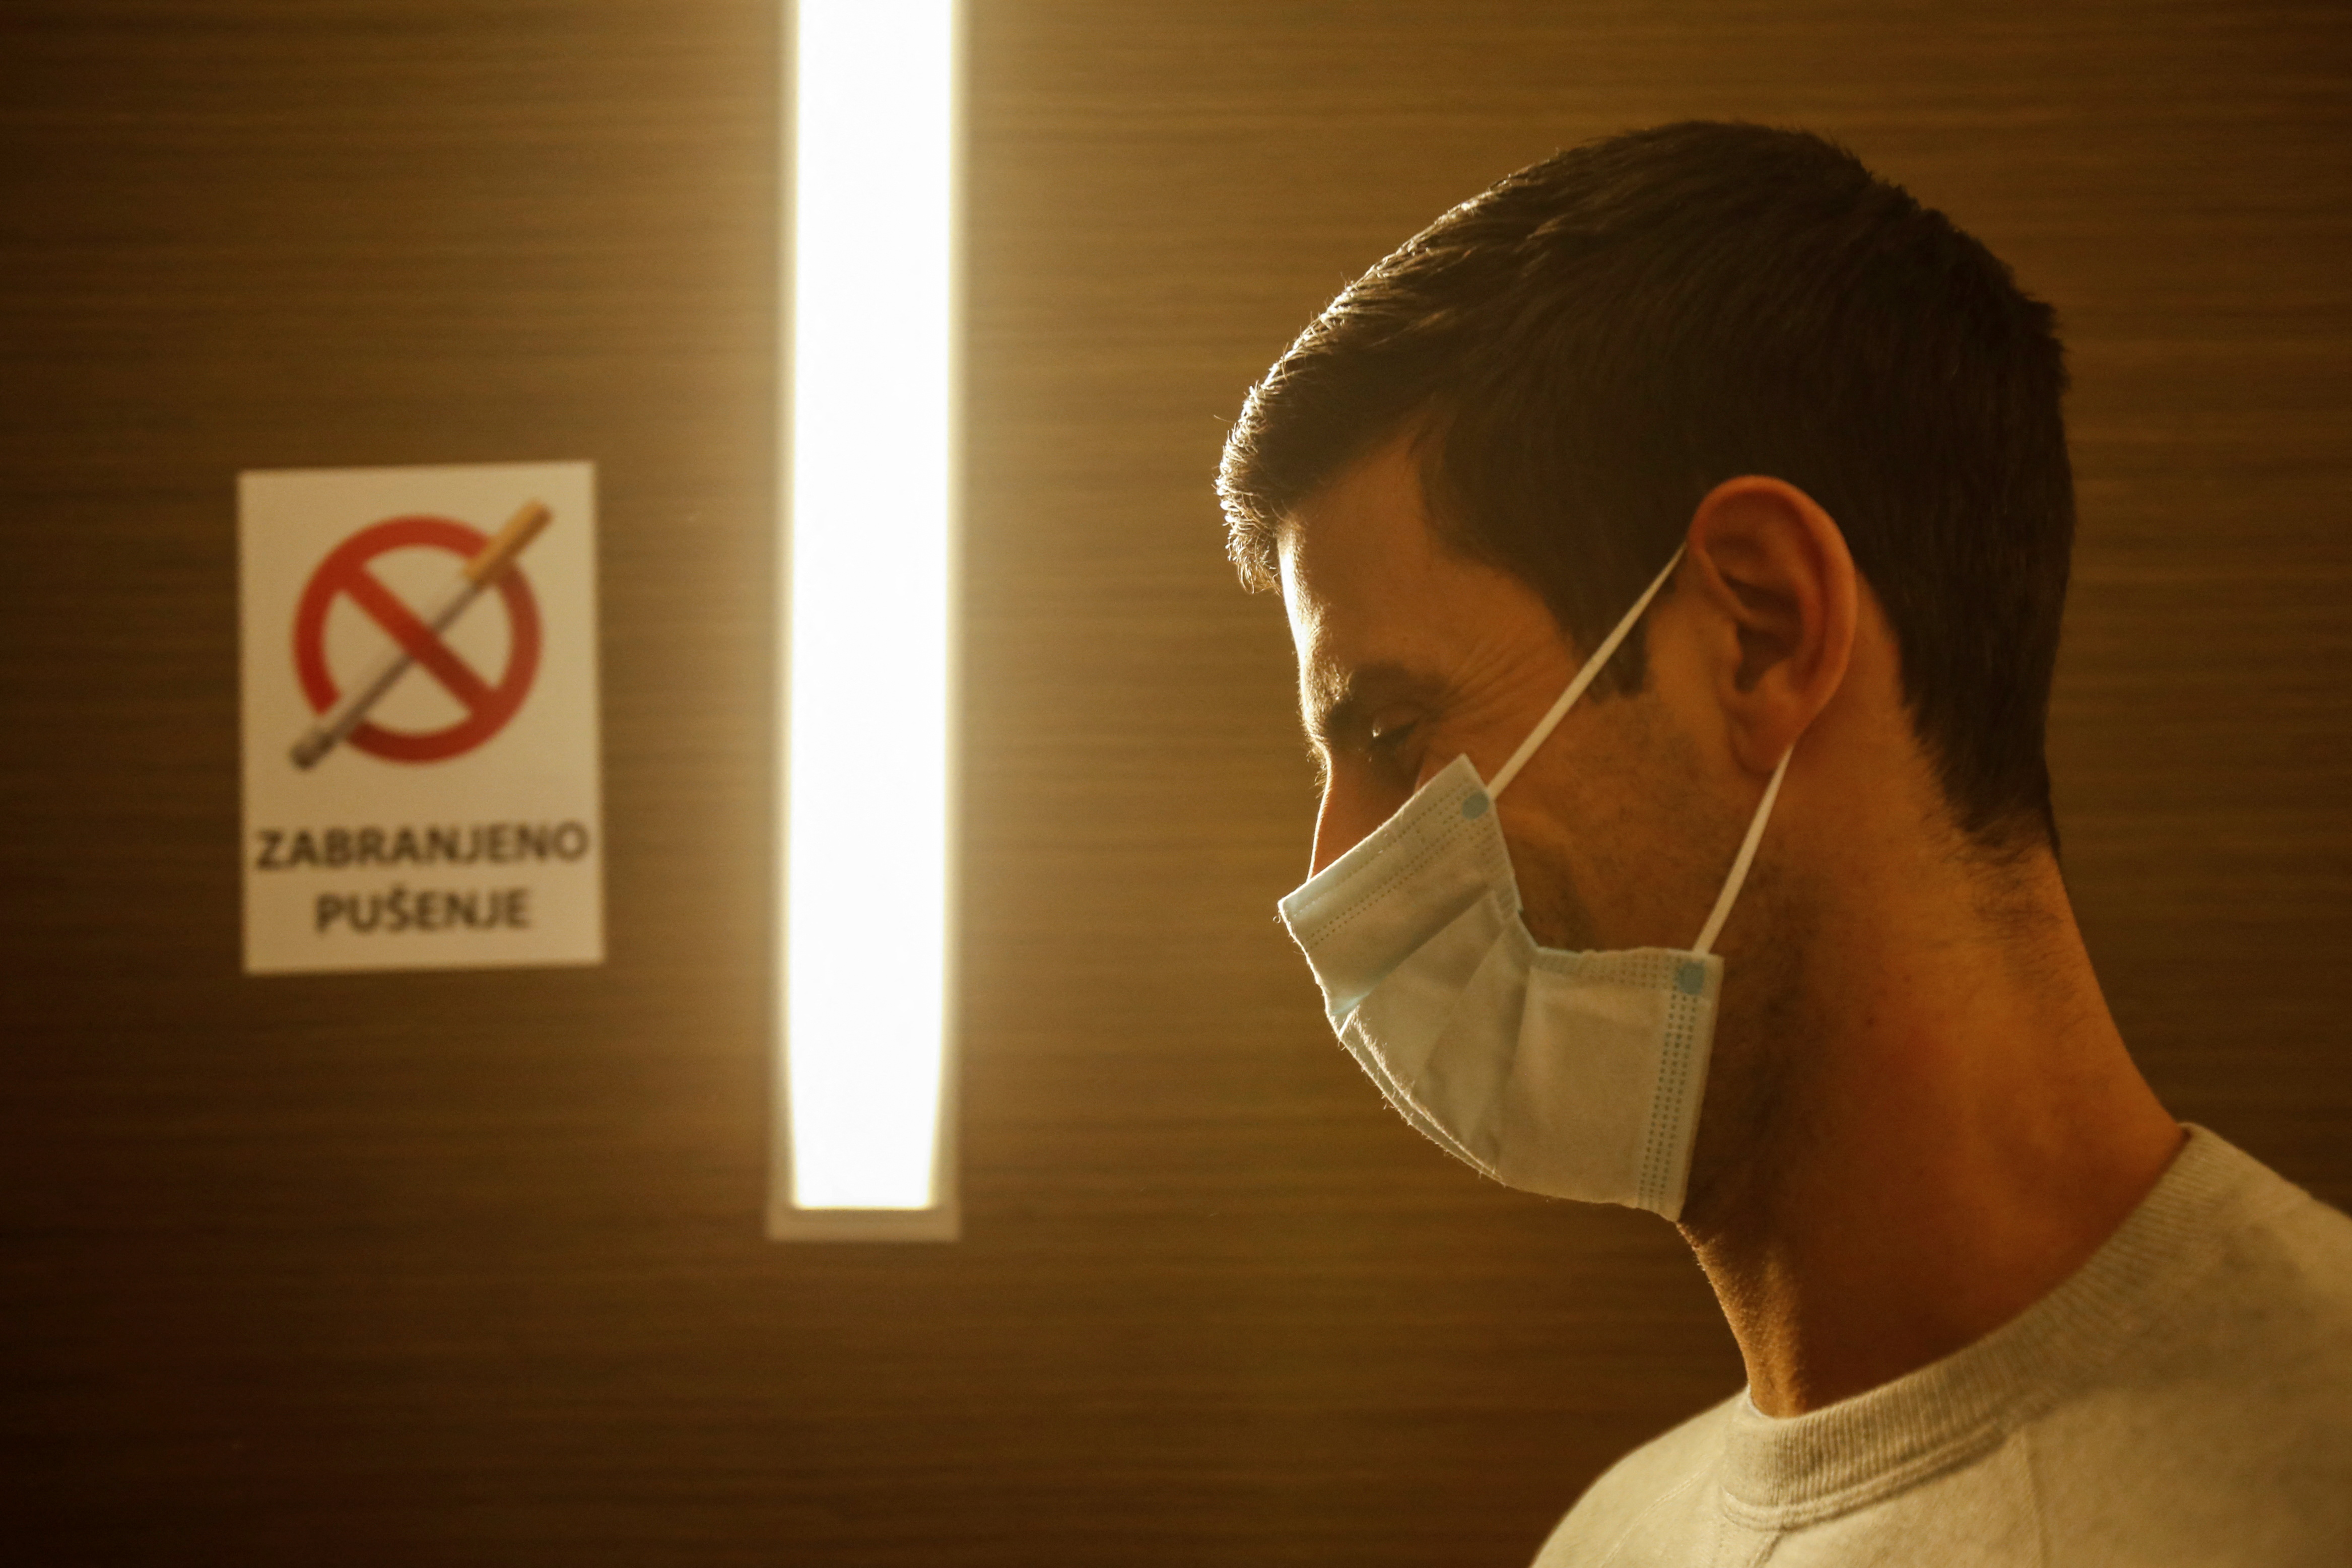 Djokovic, poised to ruin his career by not getting vaccinated: “That is the price that I’m willing to pay”.